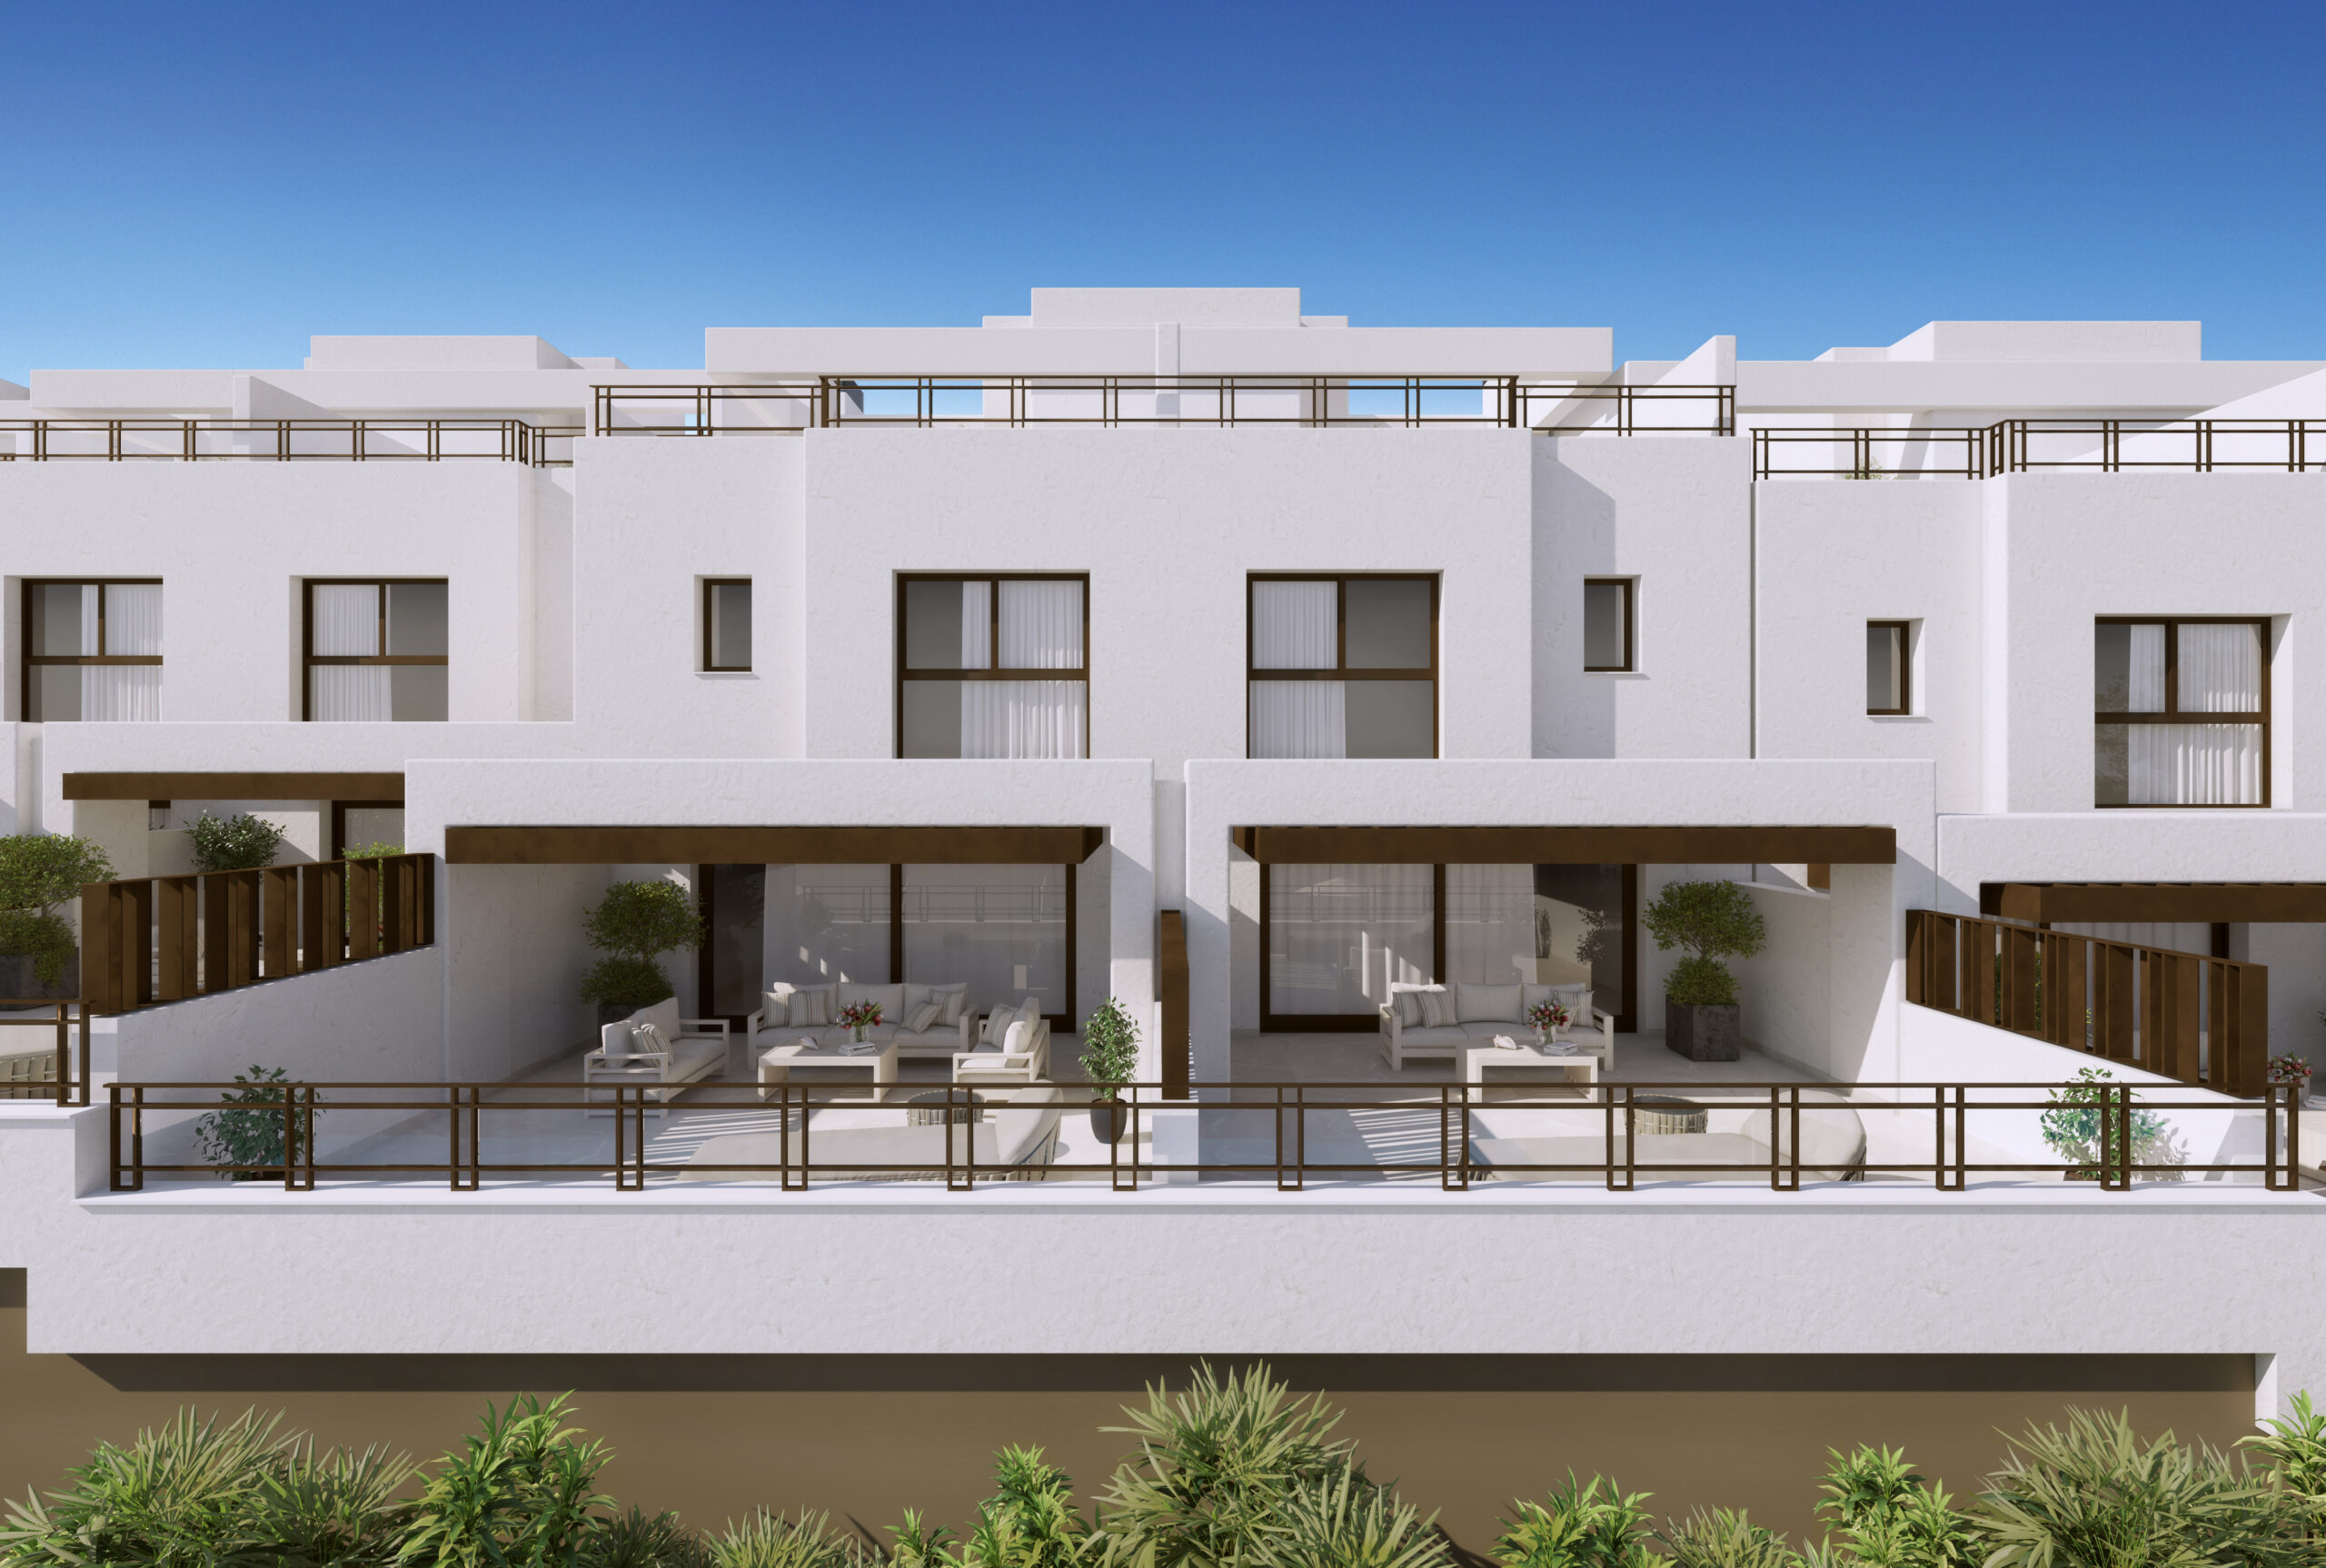 Townhouse for sale in Marbella - East 4